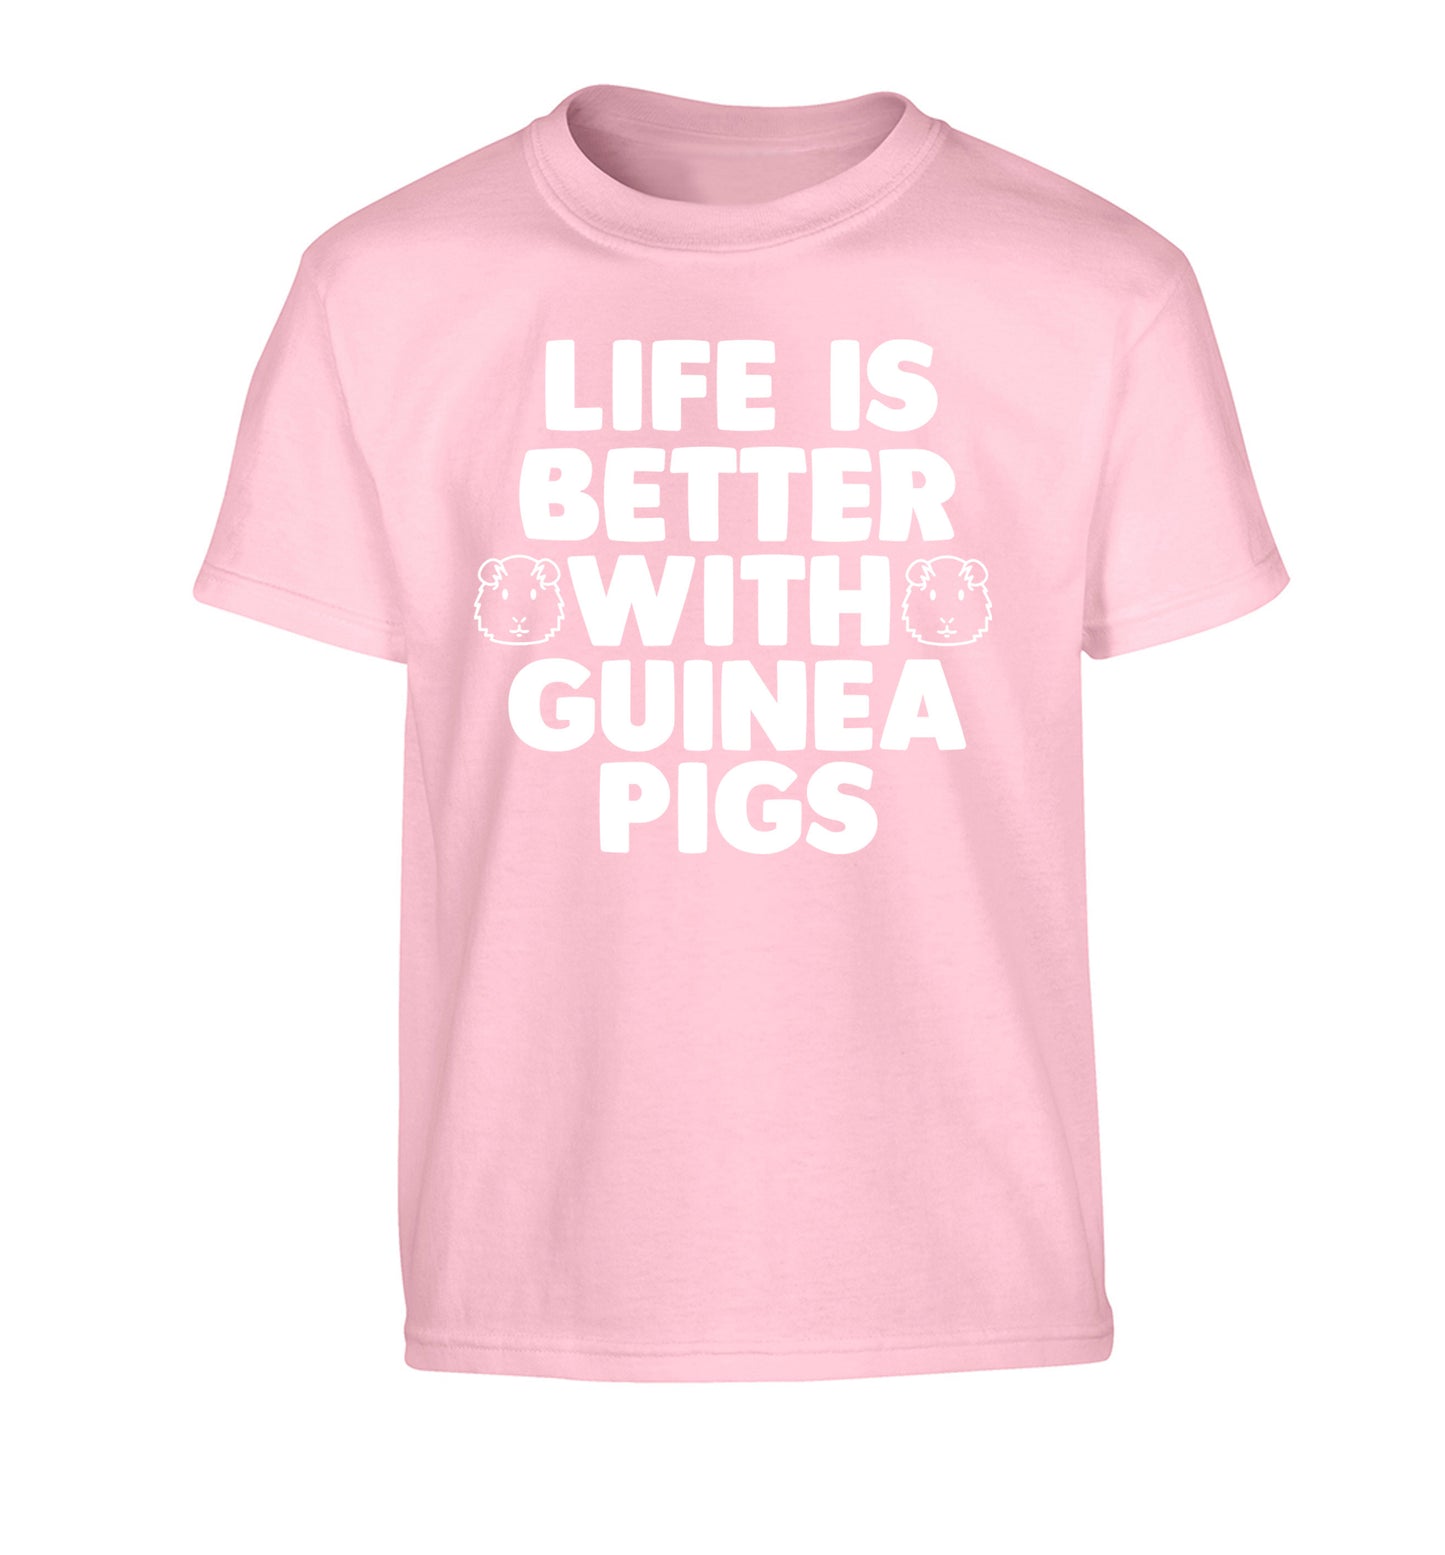 Life is better with guinea pigs Children's light pink Tshirt 12-14 Years